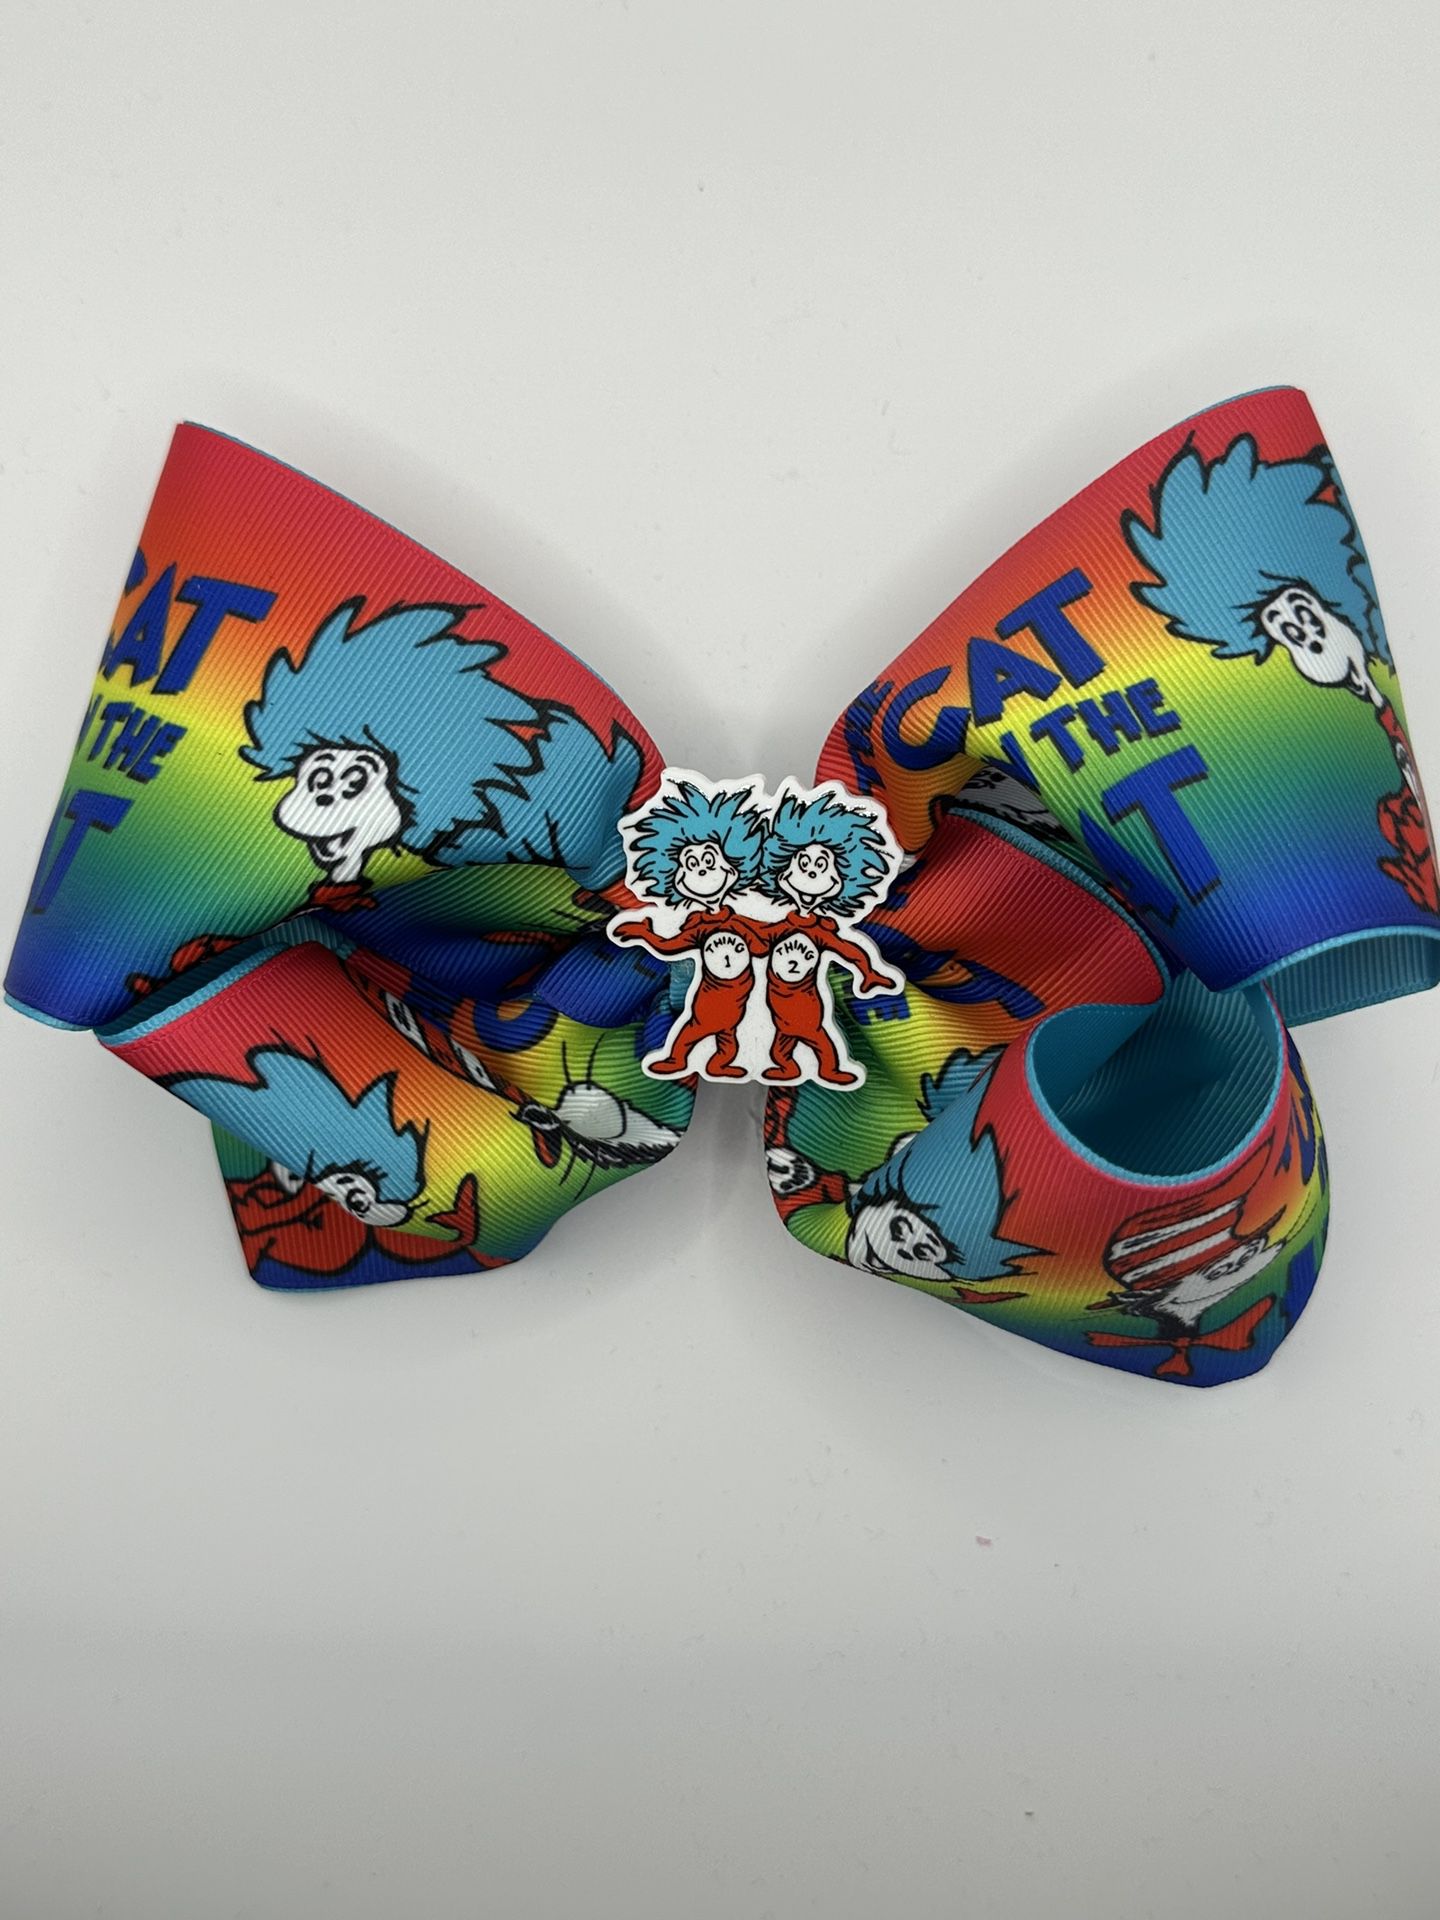 Cat In The Hat Bows 